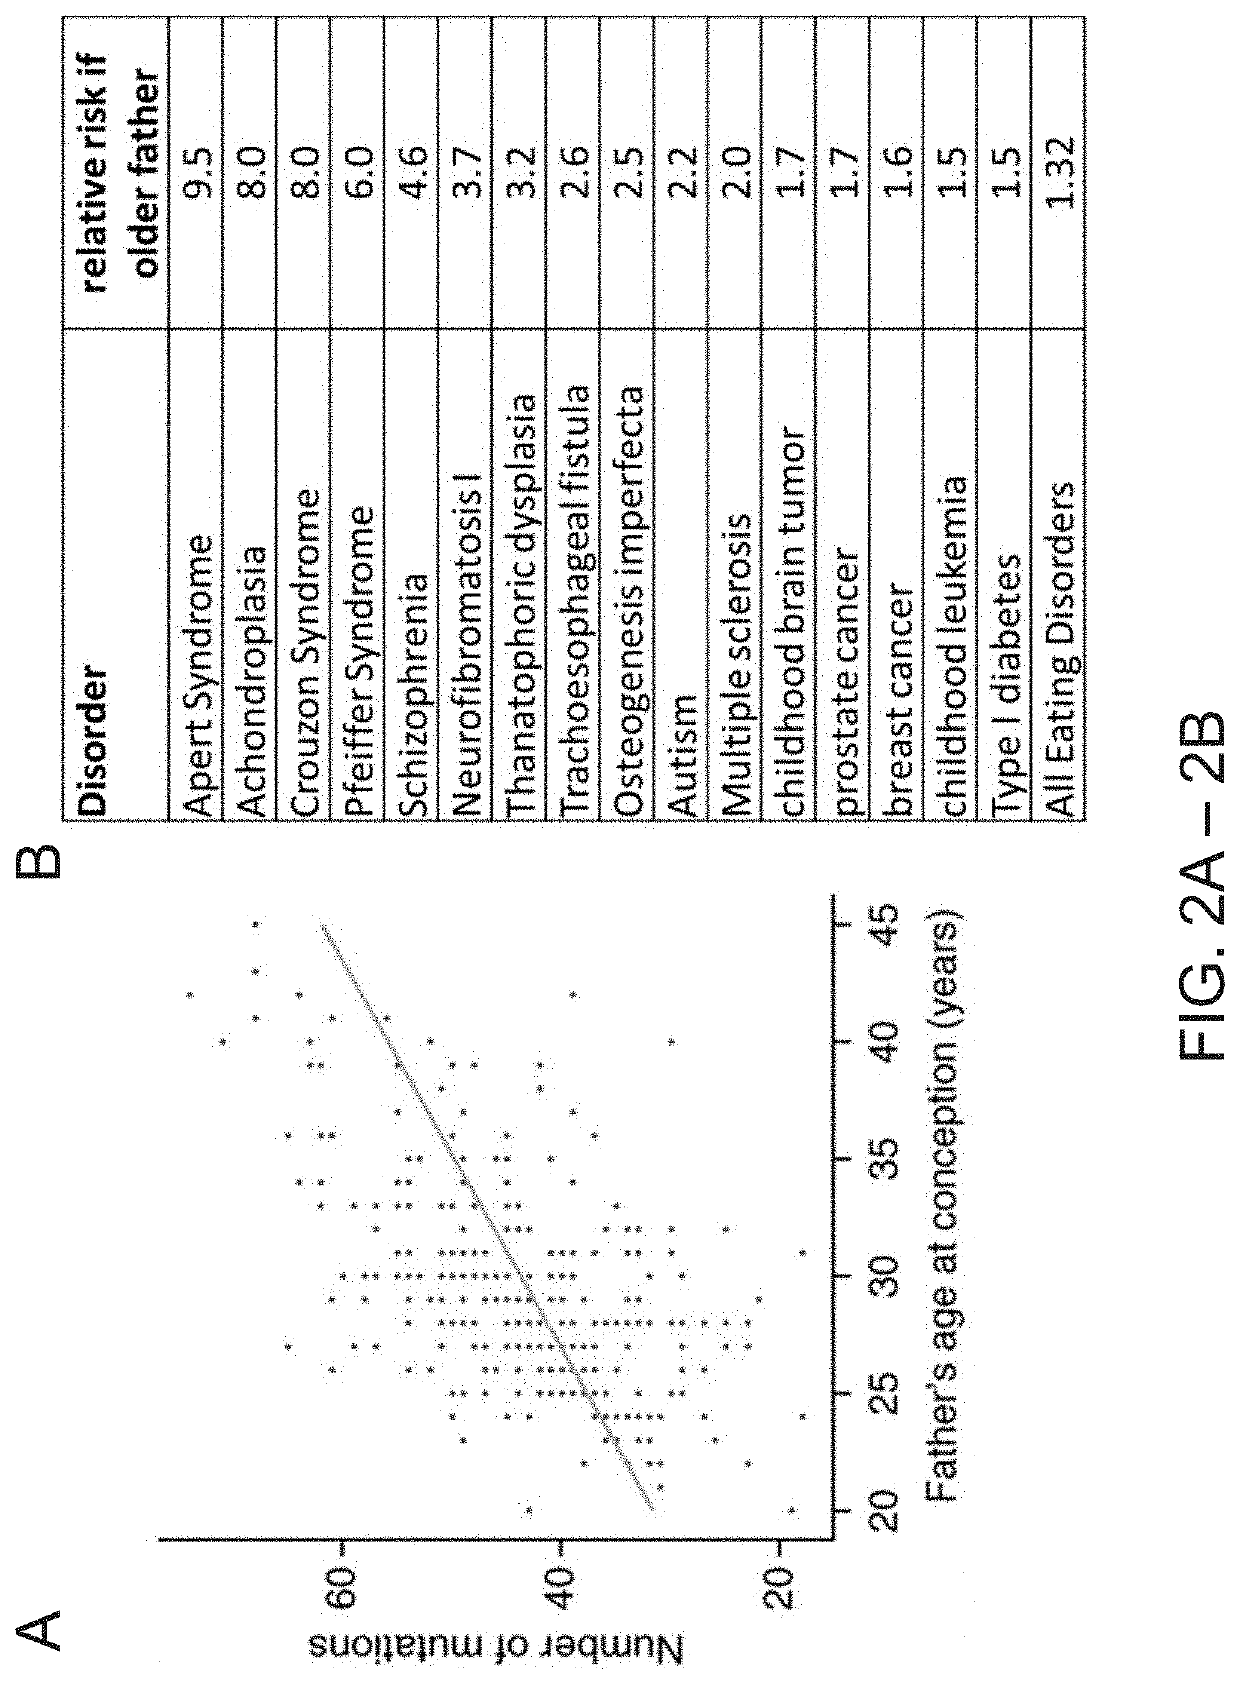 Single sperm gene expression and mutation anaylsis for prediction of diseases